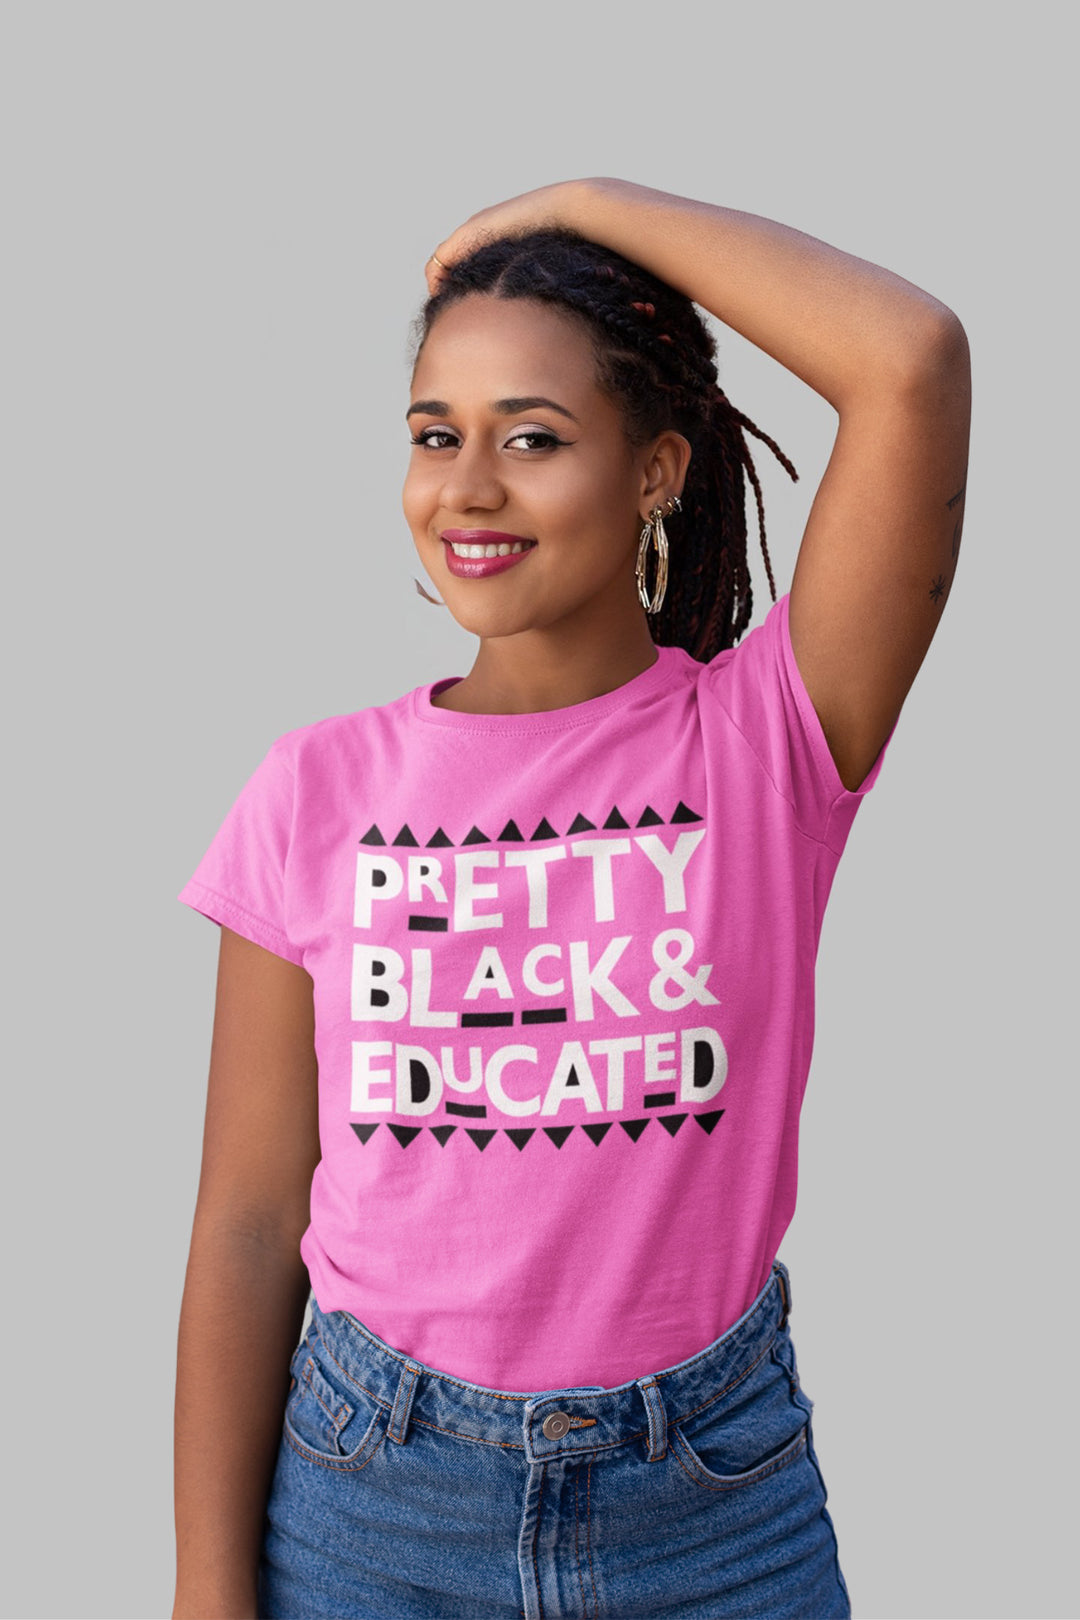  t-shirt in HOT PINK, featuring the phrase 'Pretty, Black, and Educated' in bold BLACK AND WHITE  lettering across the front. The font is Bold letters, emphasizing a message of empowerment and pride.